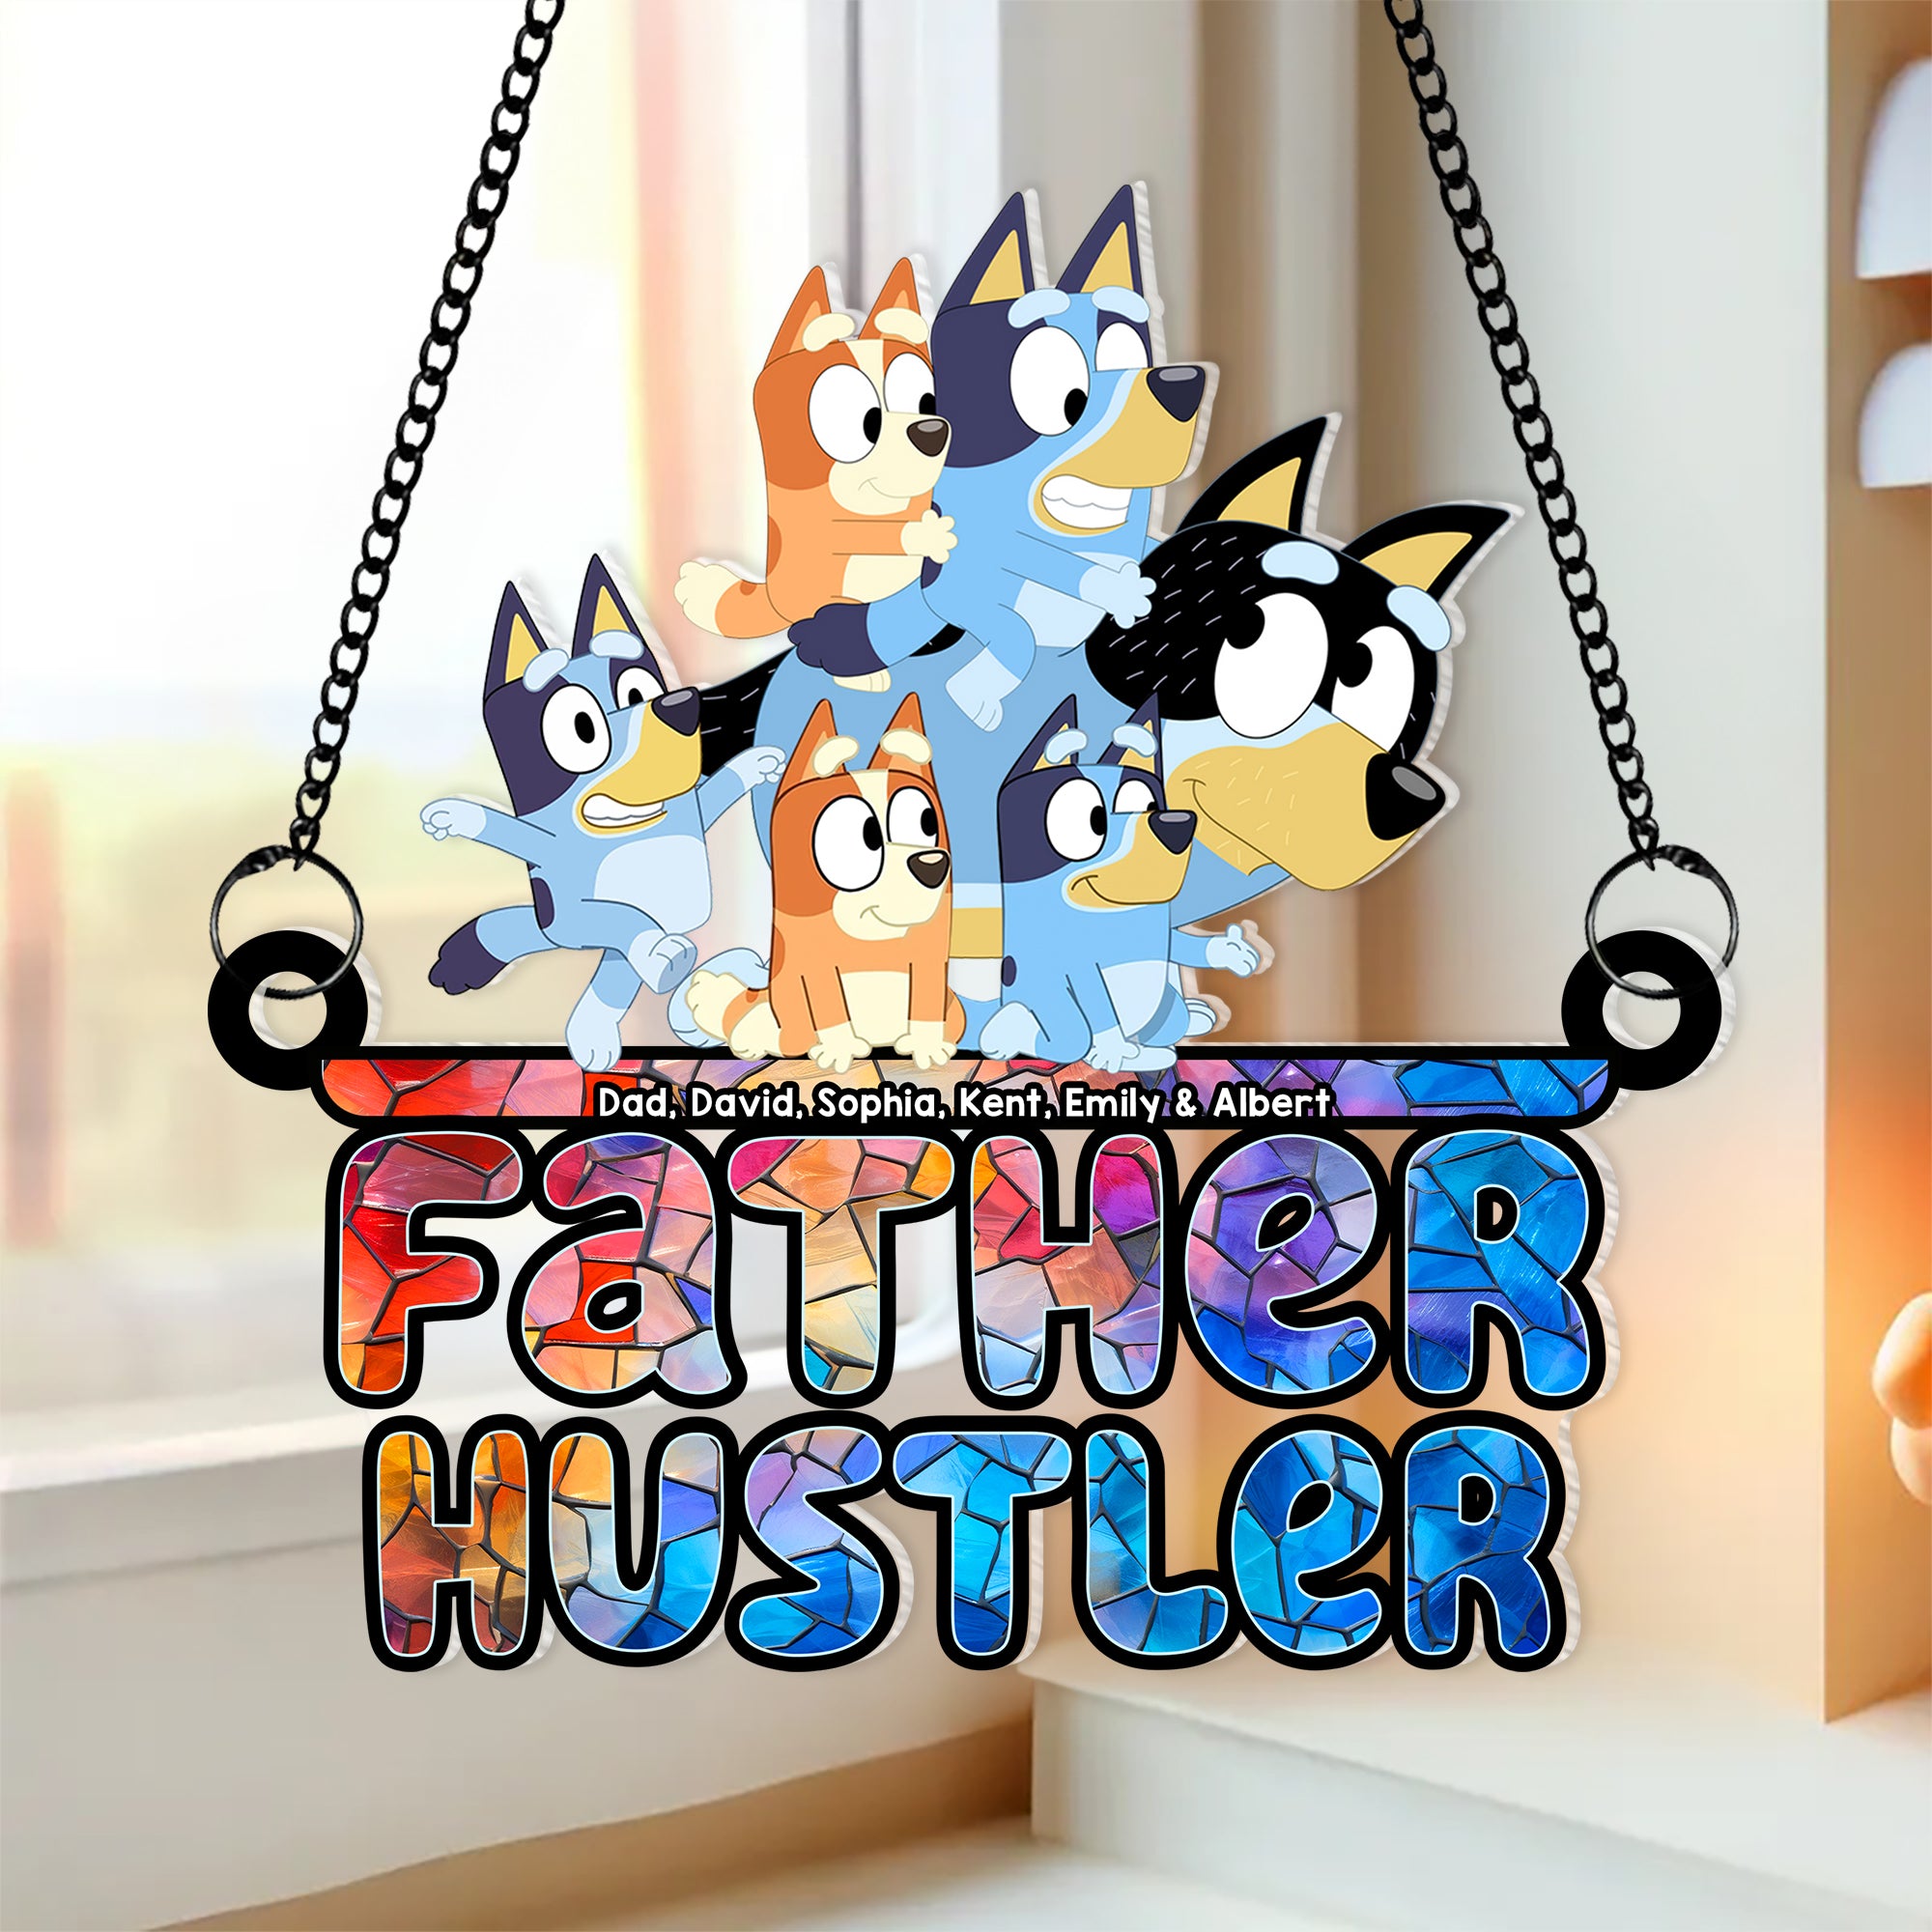 Personalized Gifts For Dad Suncatcher Window Hanging Ornament 03OHQN230424 Father's Day-Homacus